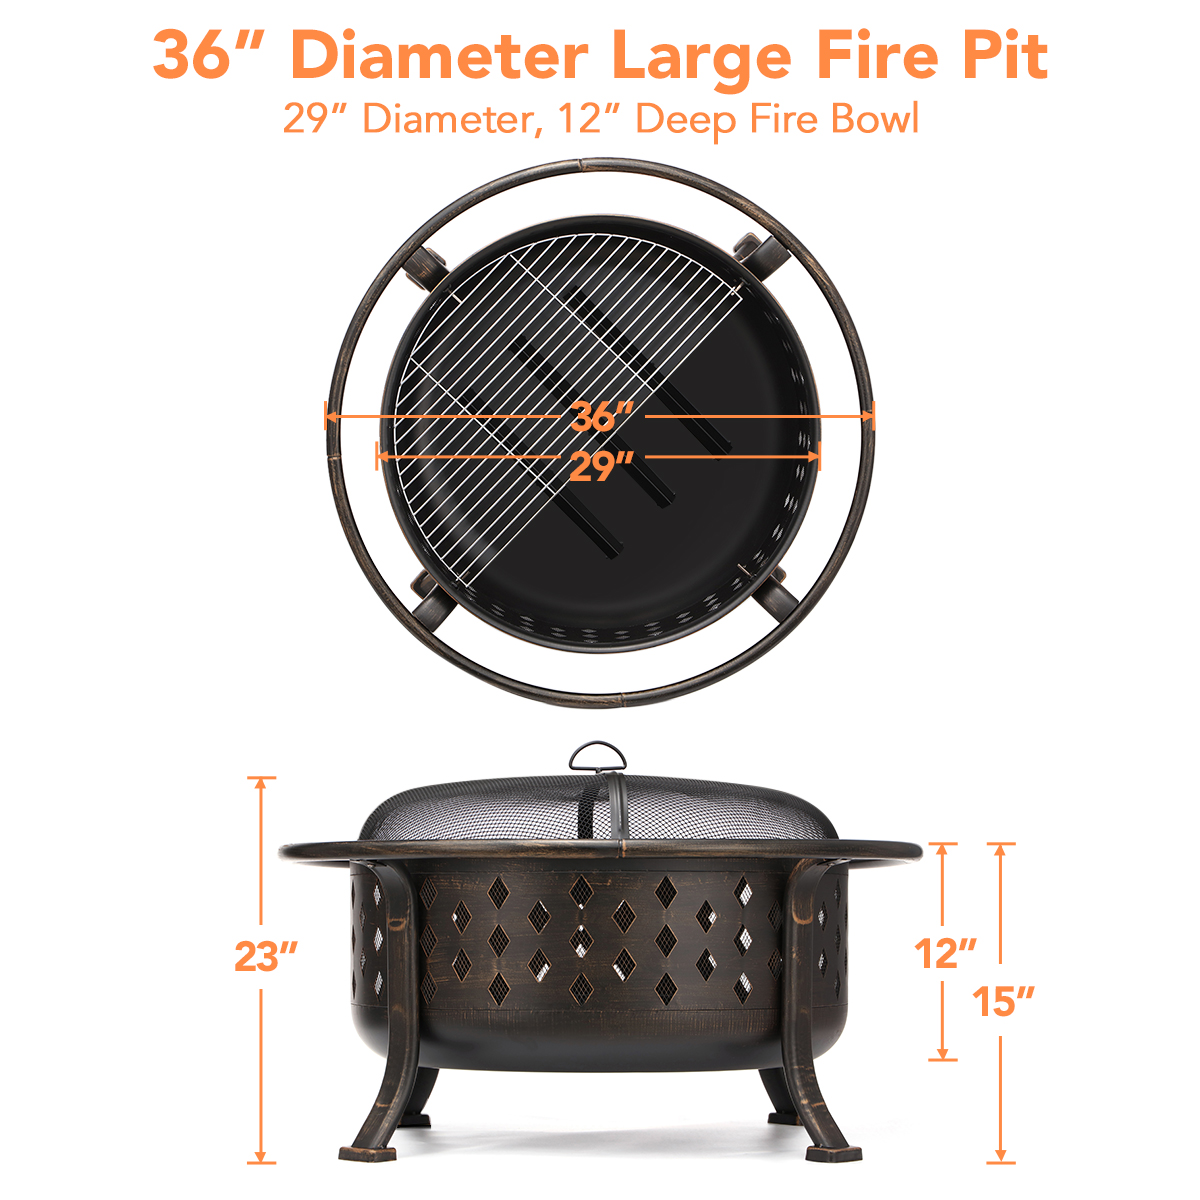 KingSo 36" Fire Pits for Outside Wood Burning Fire Pit Outdoor Firepit Square Large Bowl with Ash Plate Spark Screen Log Grate Poker for Camping Backyard Bonfire Patio - image 3 of 7